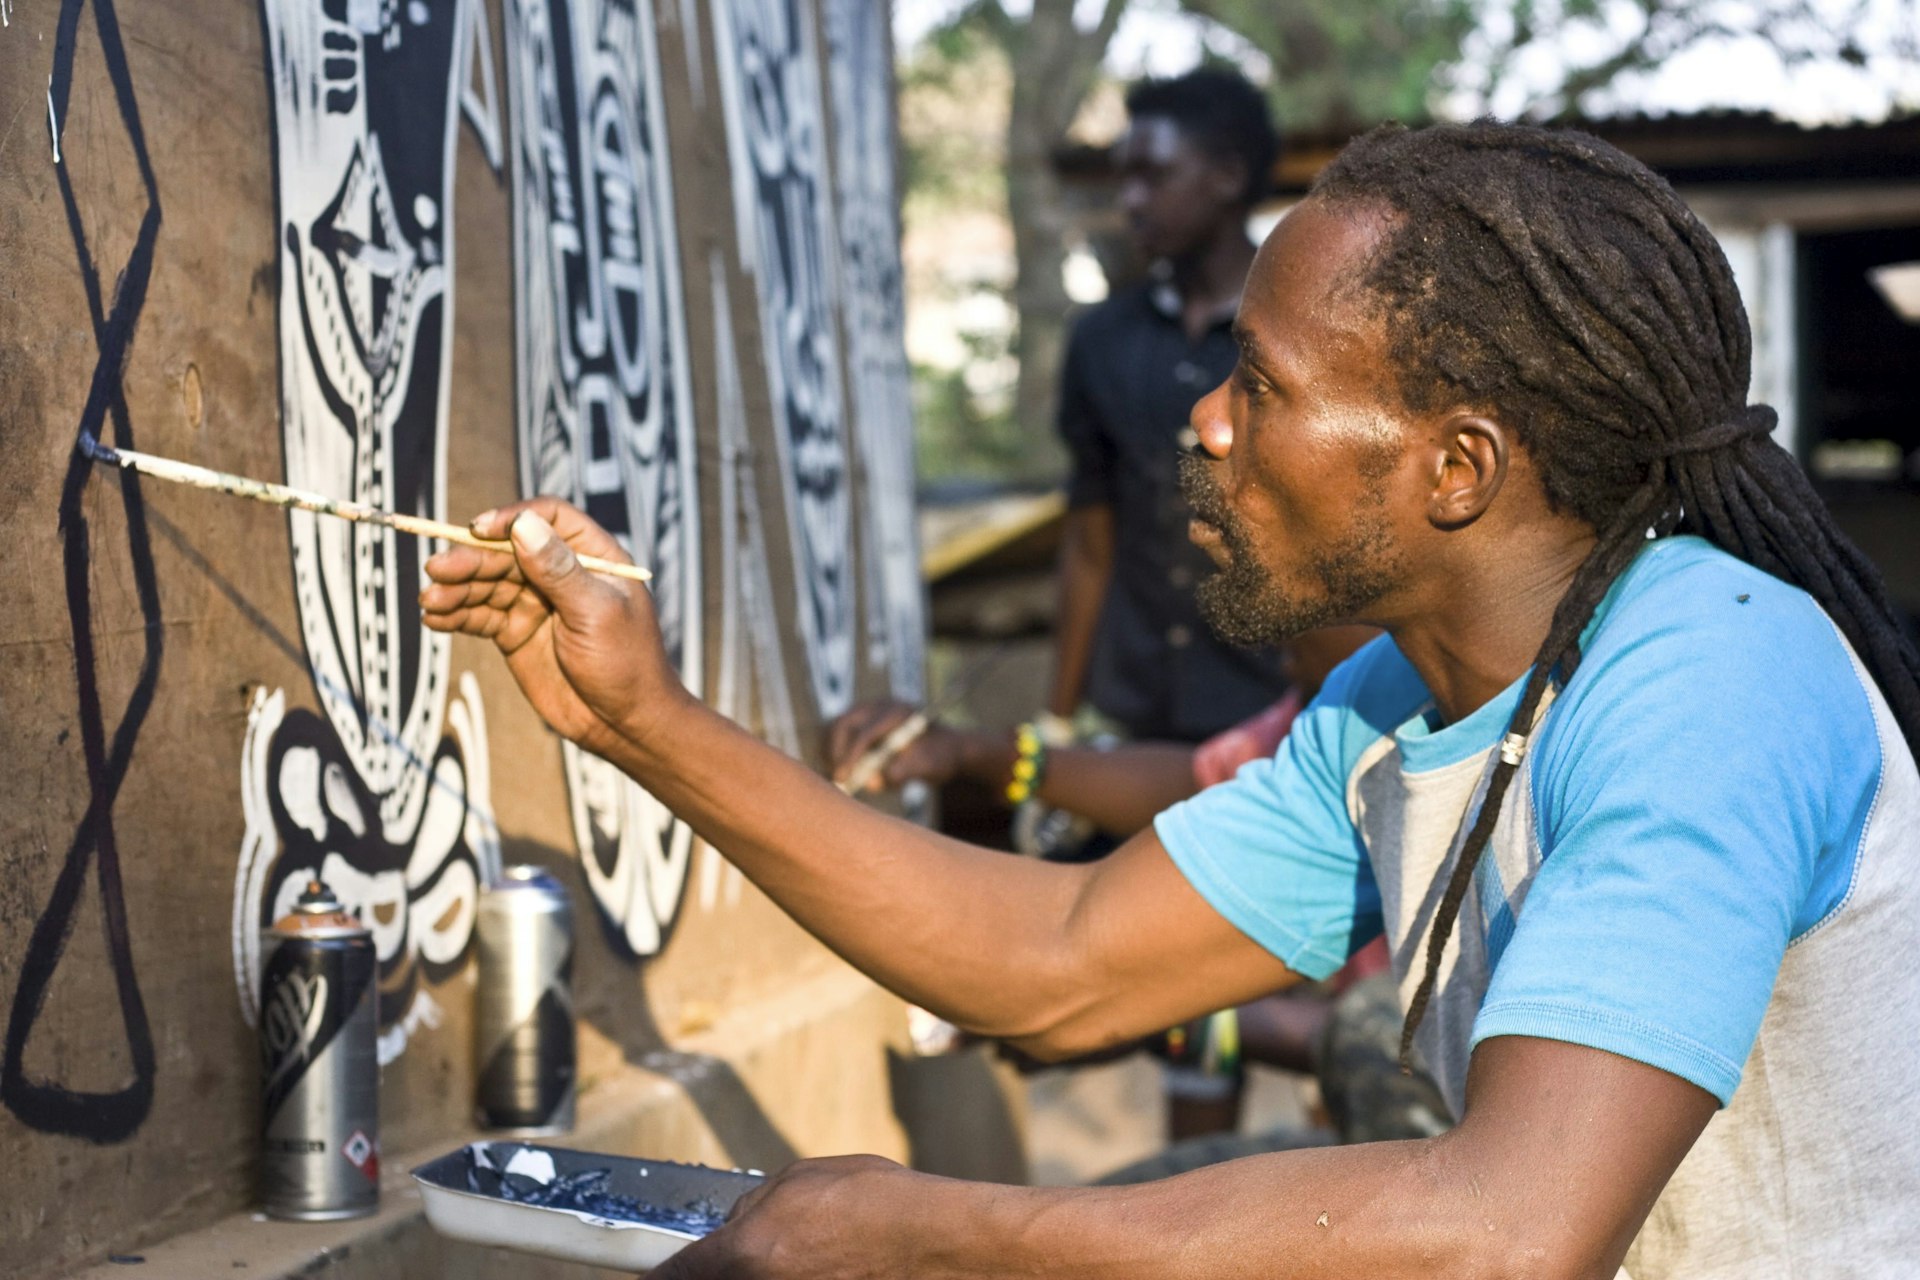 The Travel Diary: Making street art in Malawi